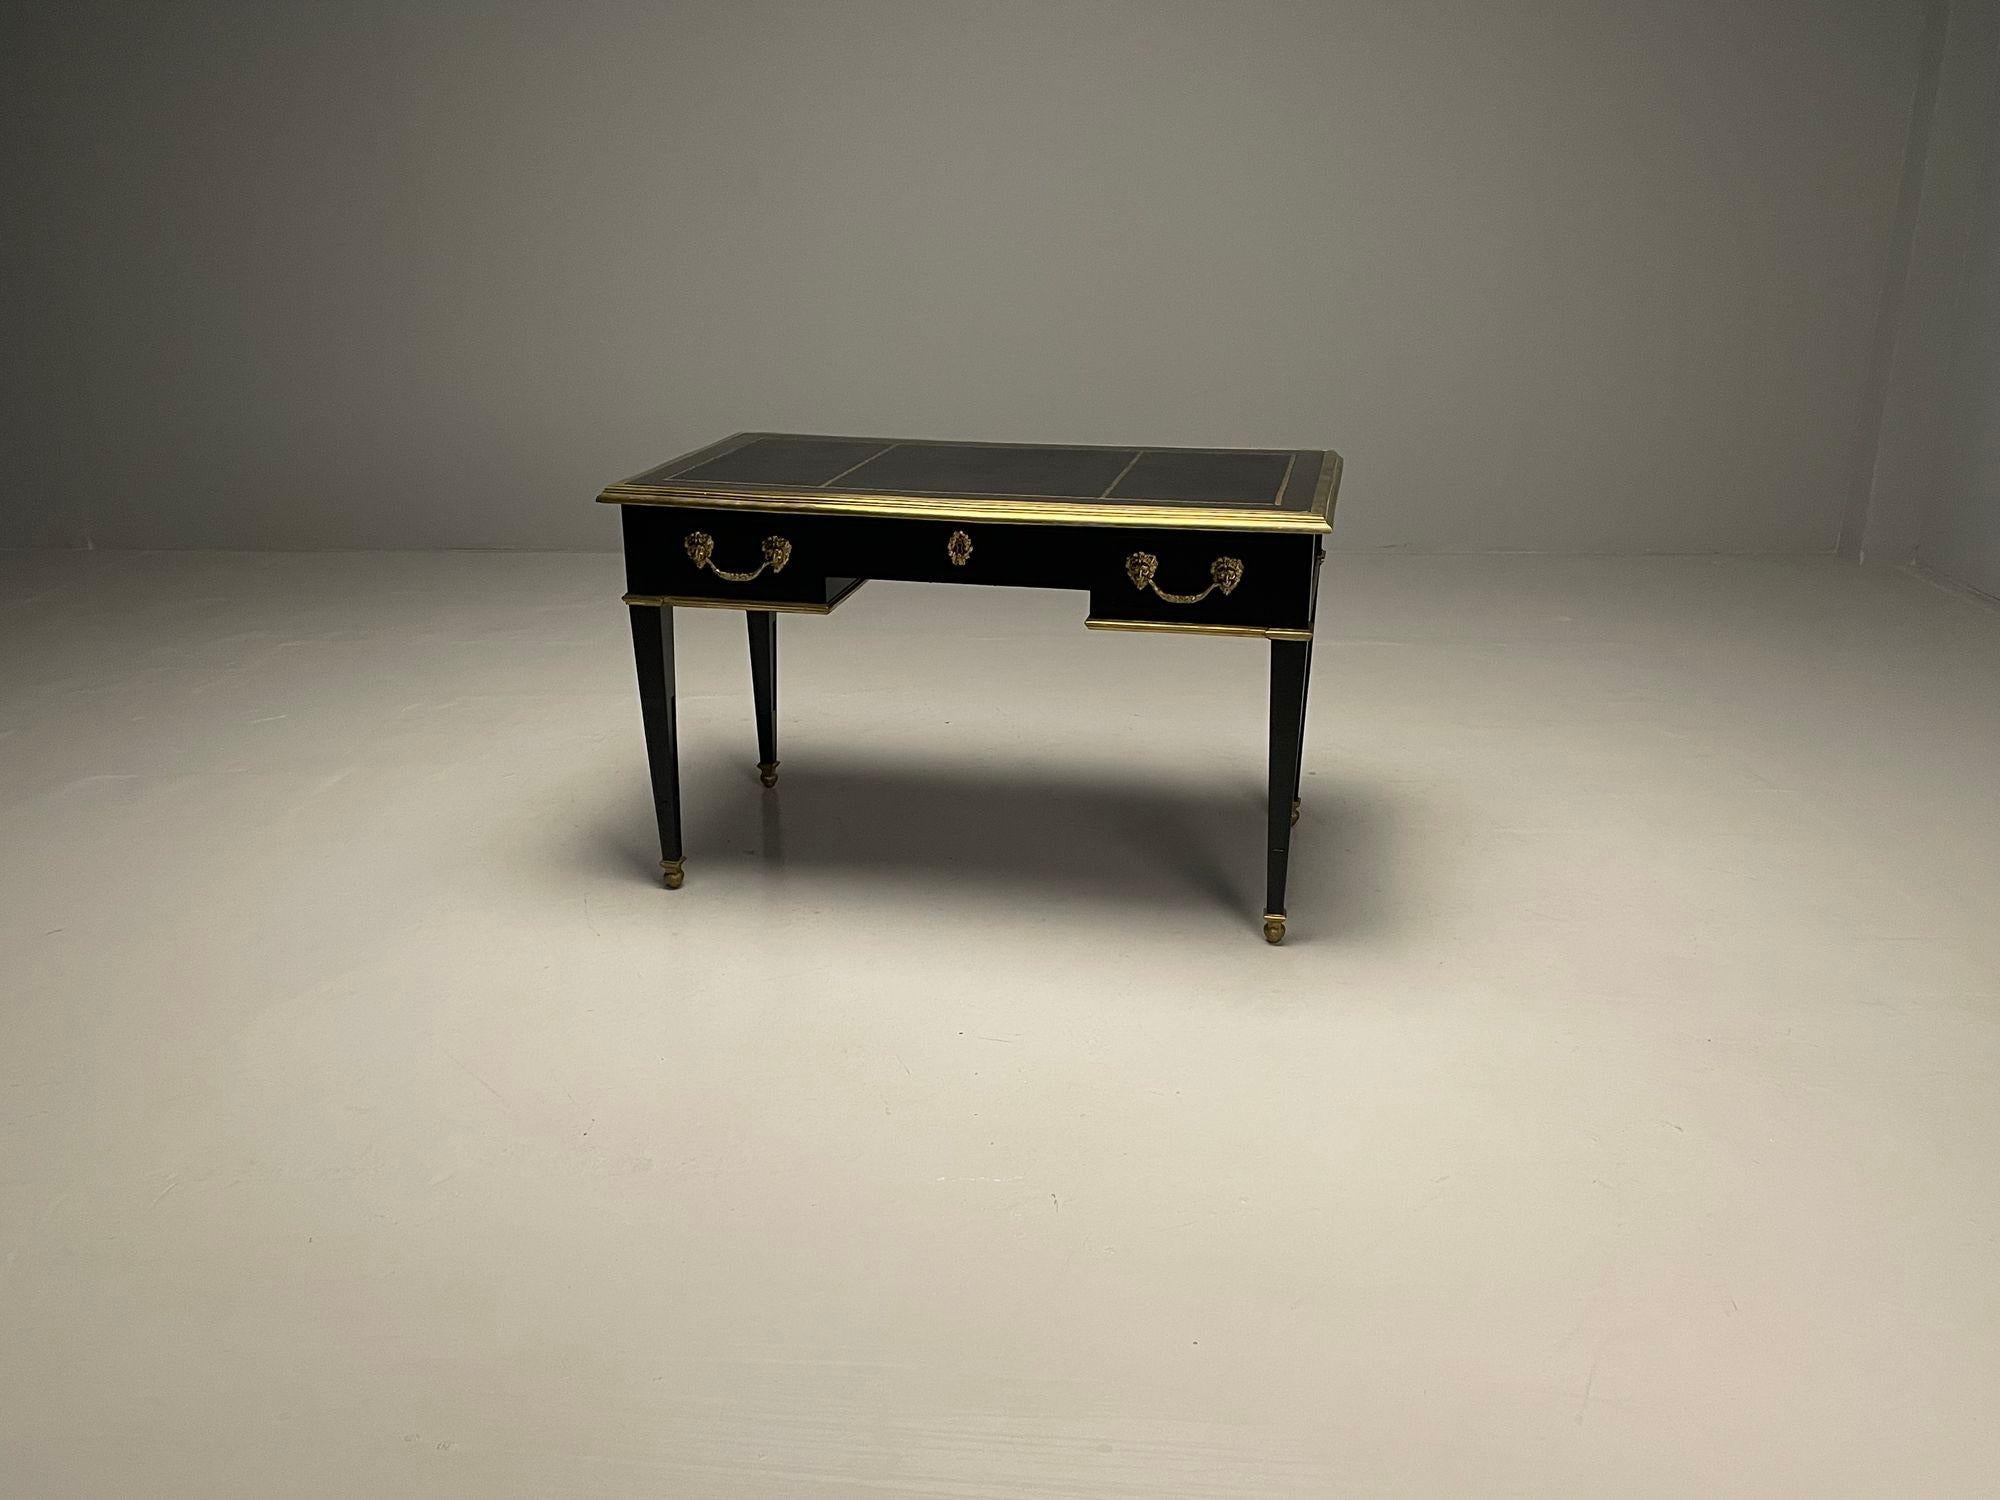 Hollywood Regency Desks, Maison Jansen Attributed, Ebonized, Bronze, Refinished.

A Compatible pair of Hollywood Regency desks in Maison Jansen manner. Two French ebony based leather top bronze-mounted desks in the manner of Maison Jansen. Each with